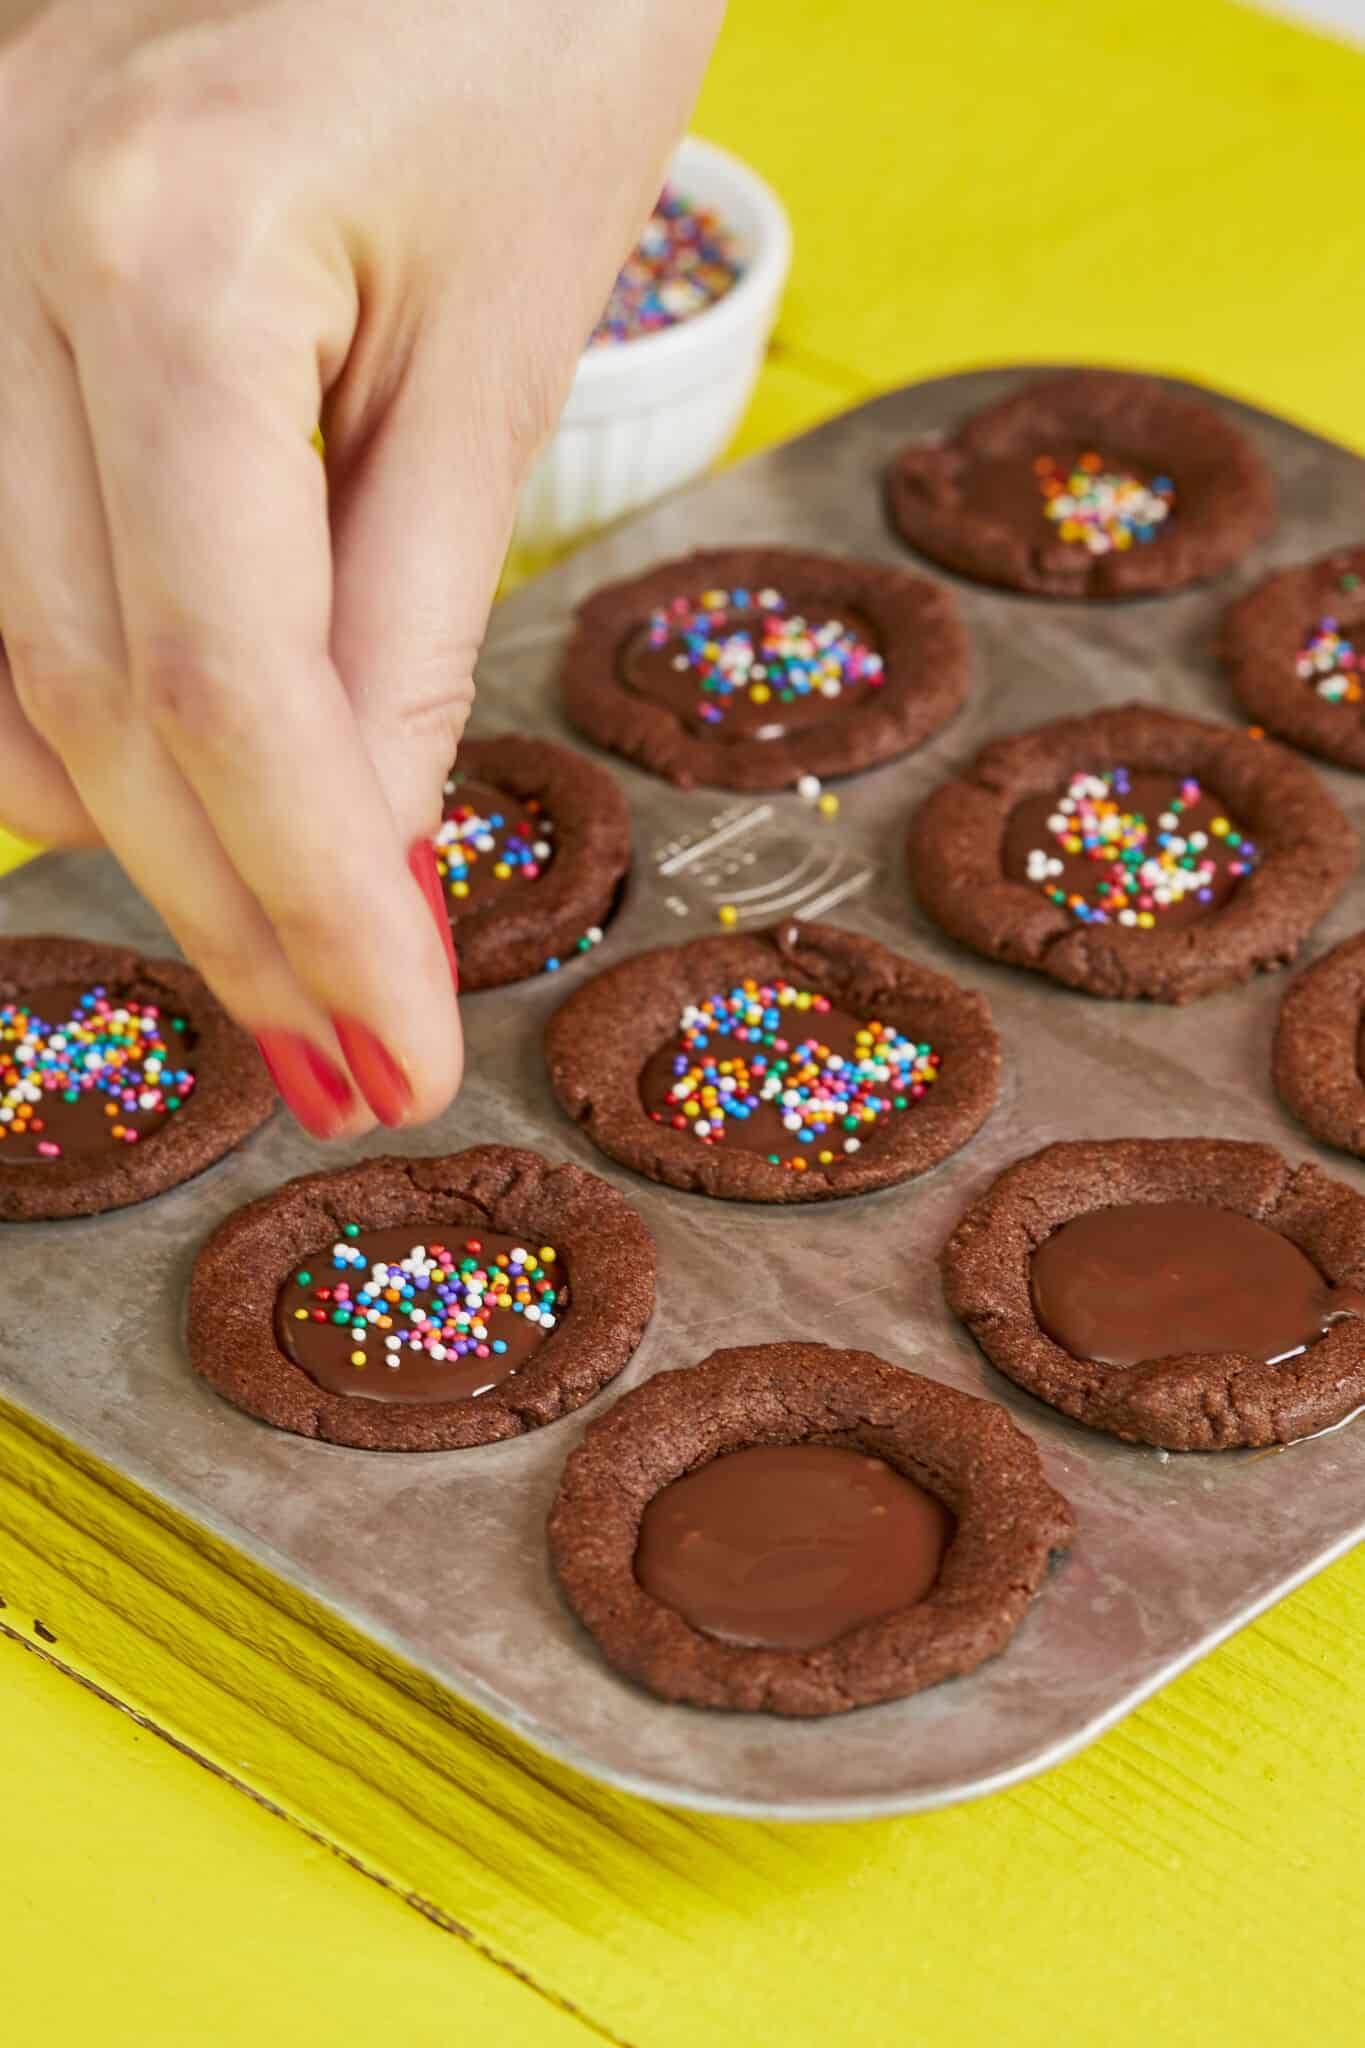 Chocolate Cookie Cups are baked and set perfectly in a 12-well mini cupcake pan. These bite-size cups have lightly crispy edges, soft and chewy inside with a silky ganache filling. They're decorated with colorful sprinkles. 